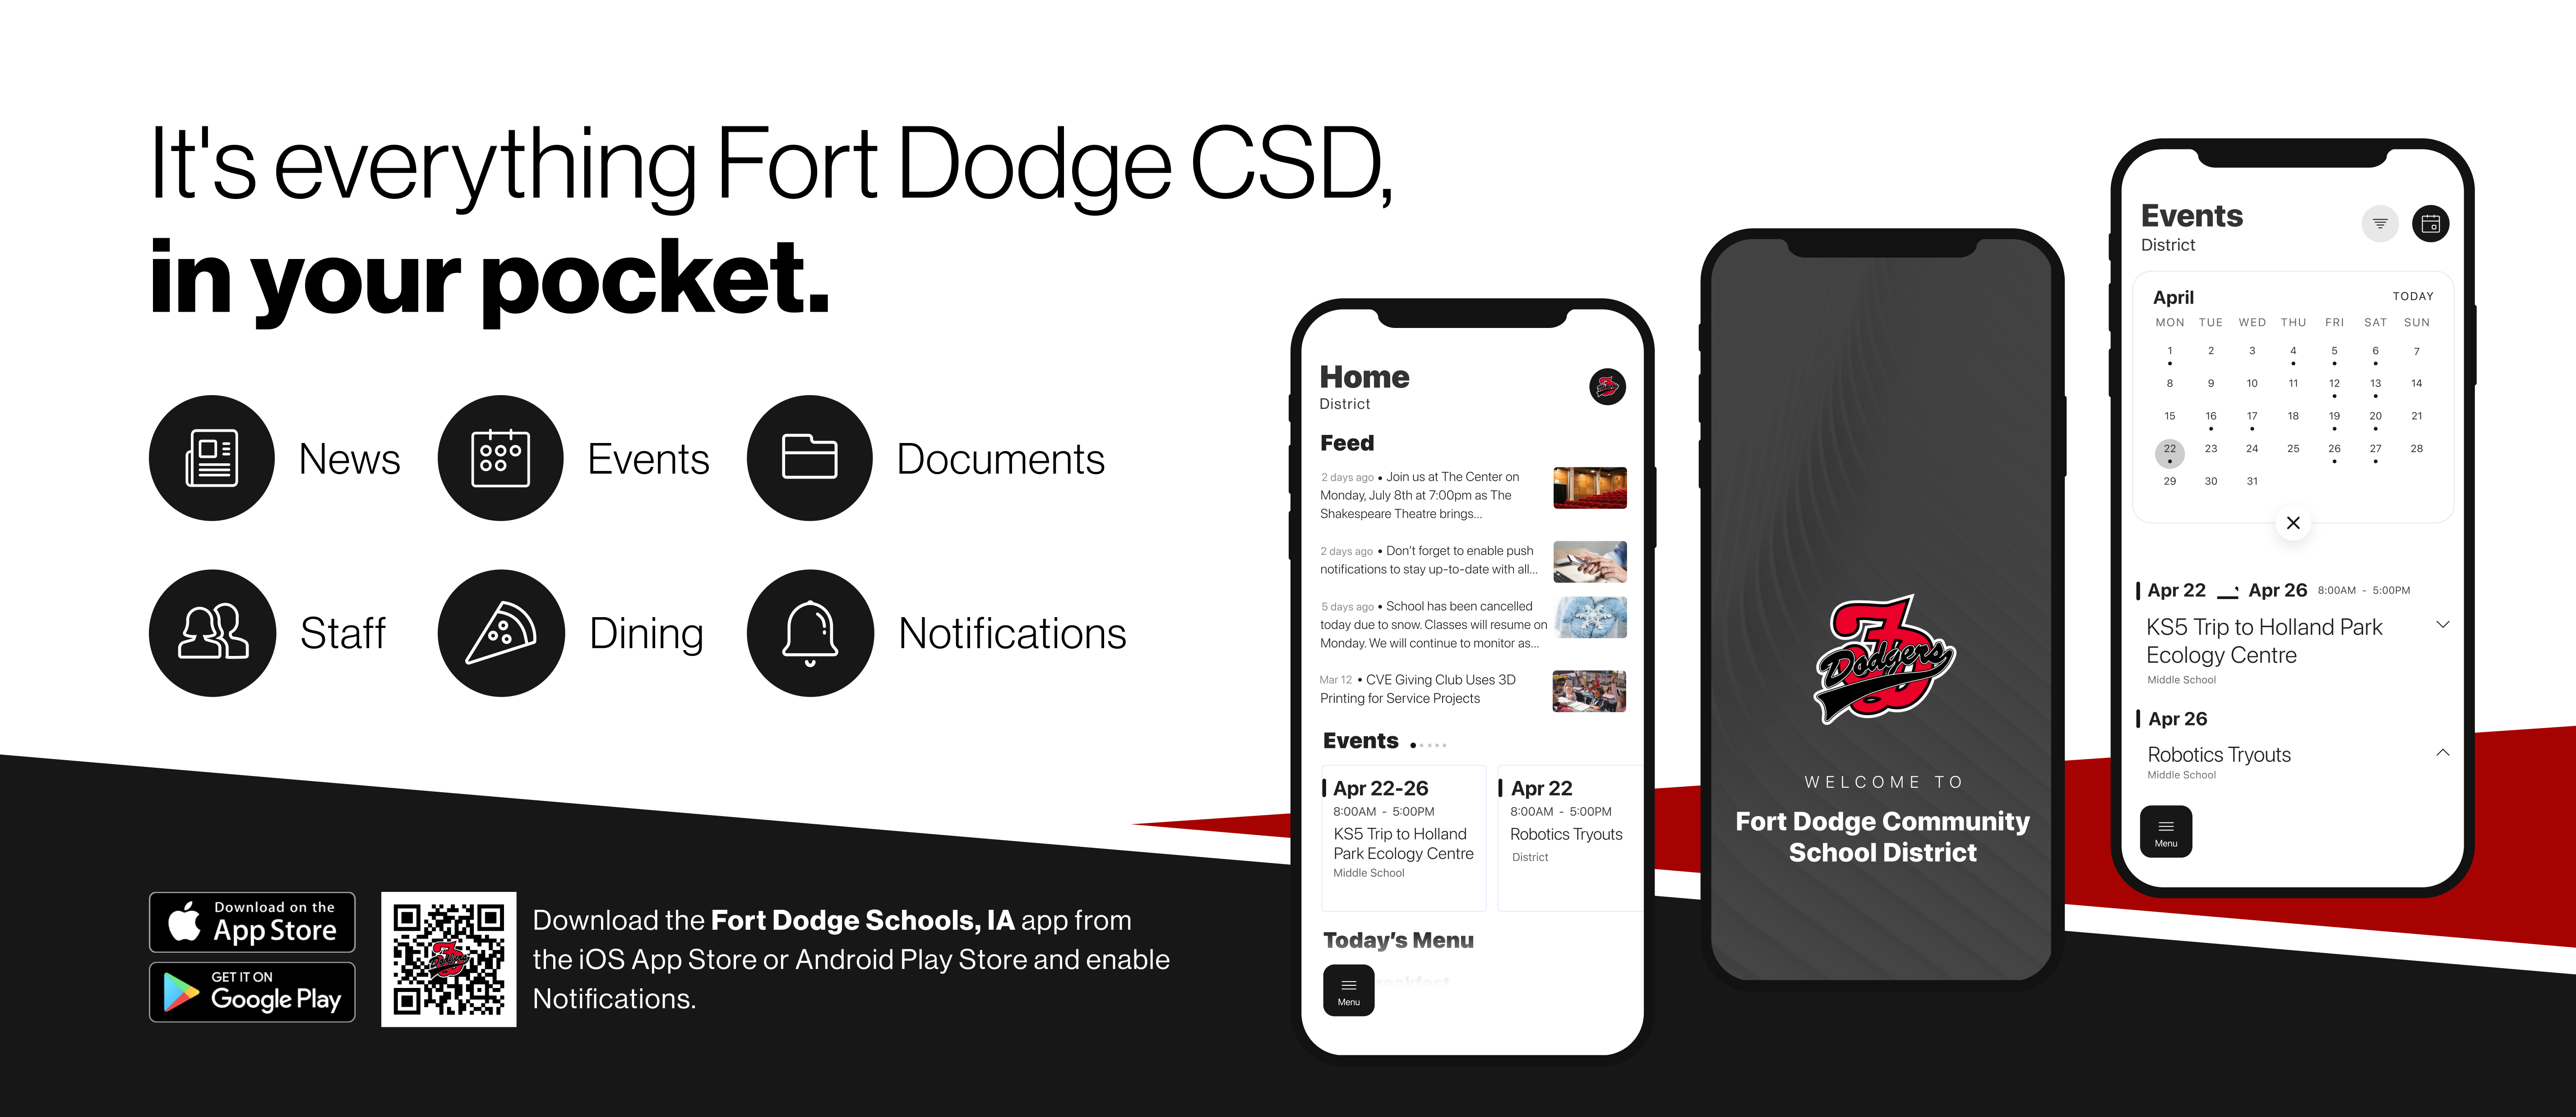 It's everything Fort Dodge CSD, in your pocket.